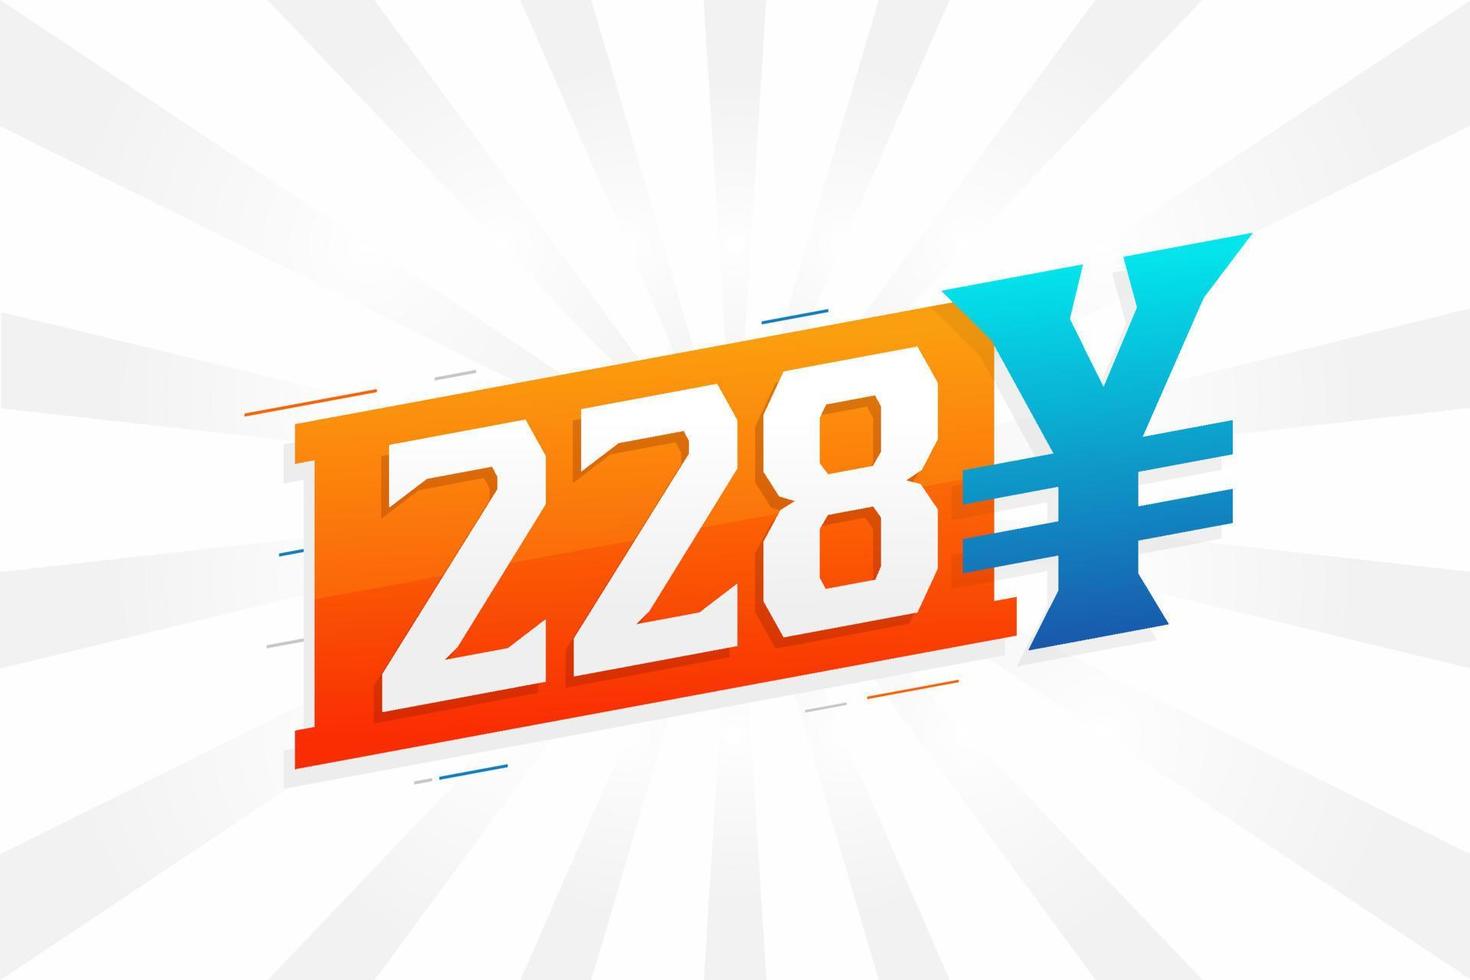 228 Yuan Chinese currency vector text symbol. 228 Yen Japanese currency Money stock vector